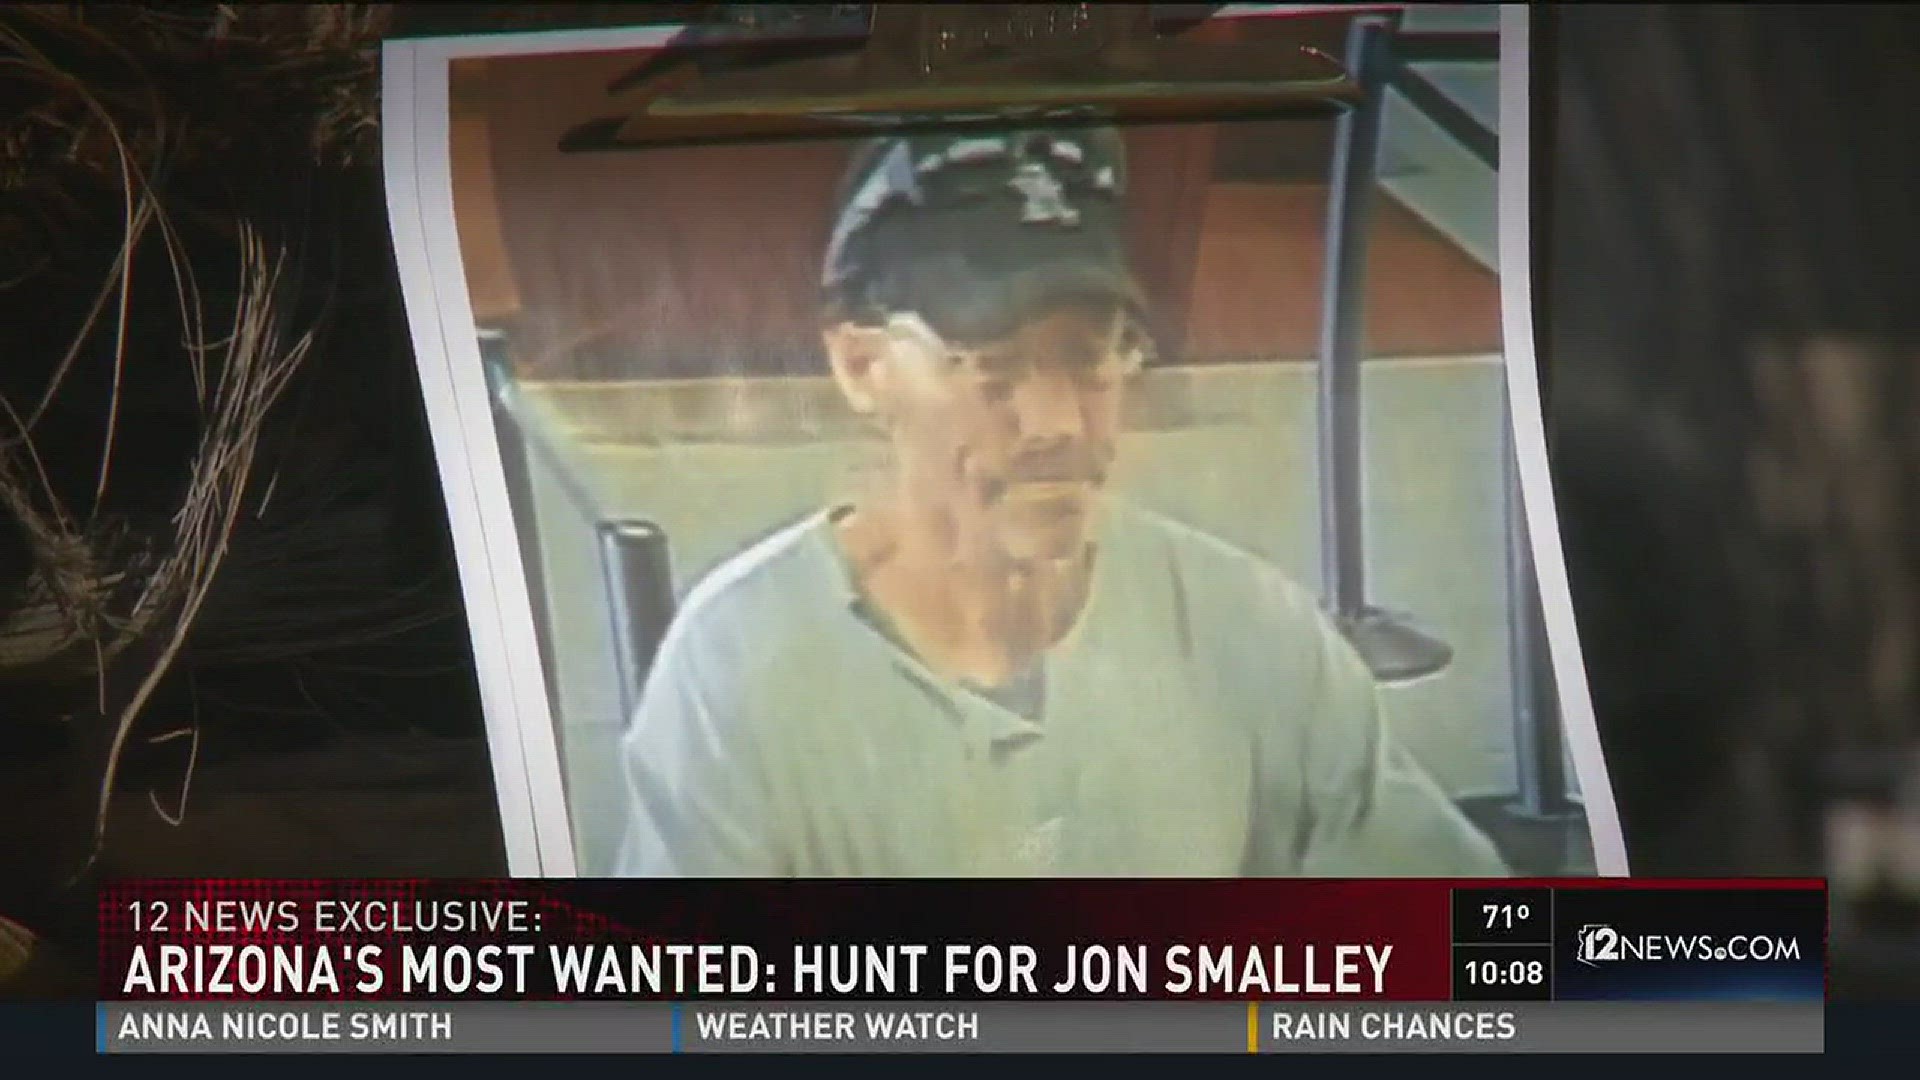 Arizona's most wanted: hunt for Jon Smalley.